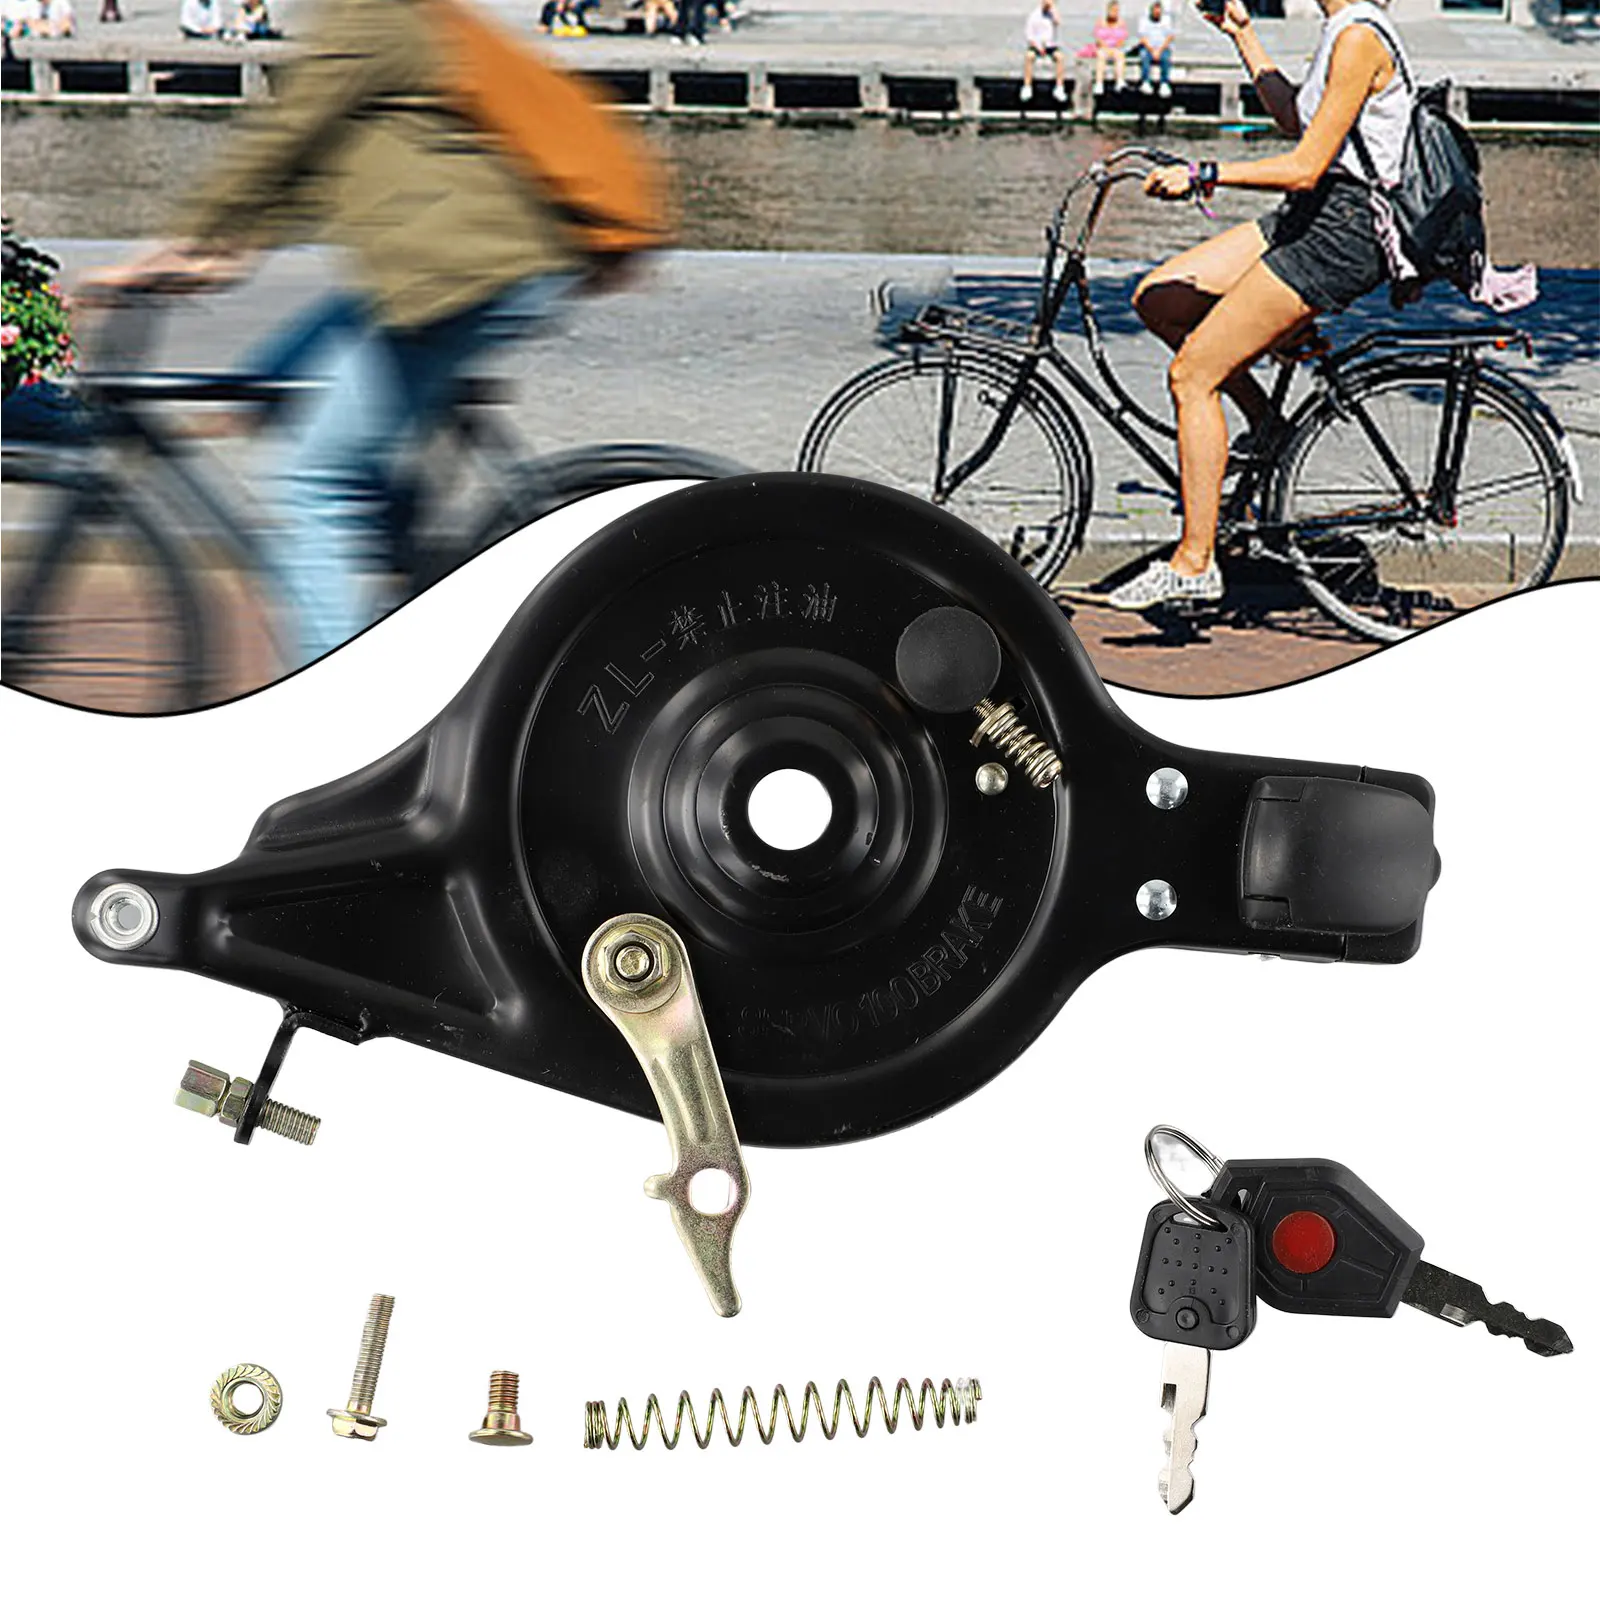 

High Quality Particular Brand New Rear Brake Bike Bicycle Bicycle Bike Noiseless Rear Brake 90 100 Type Assembly Ebike